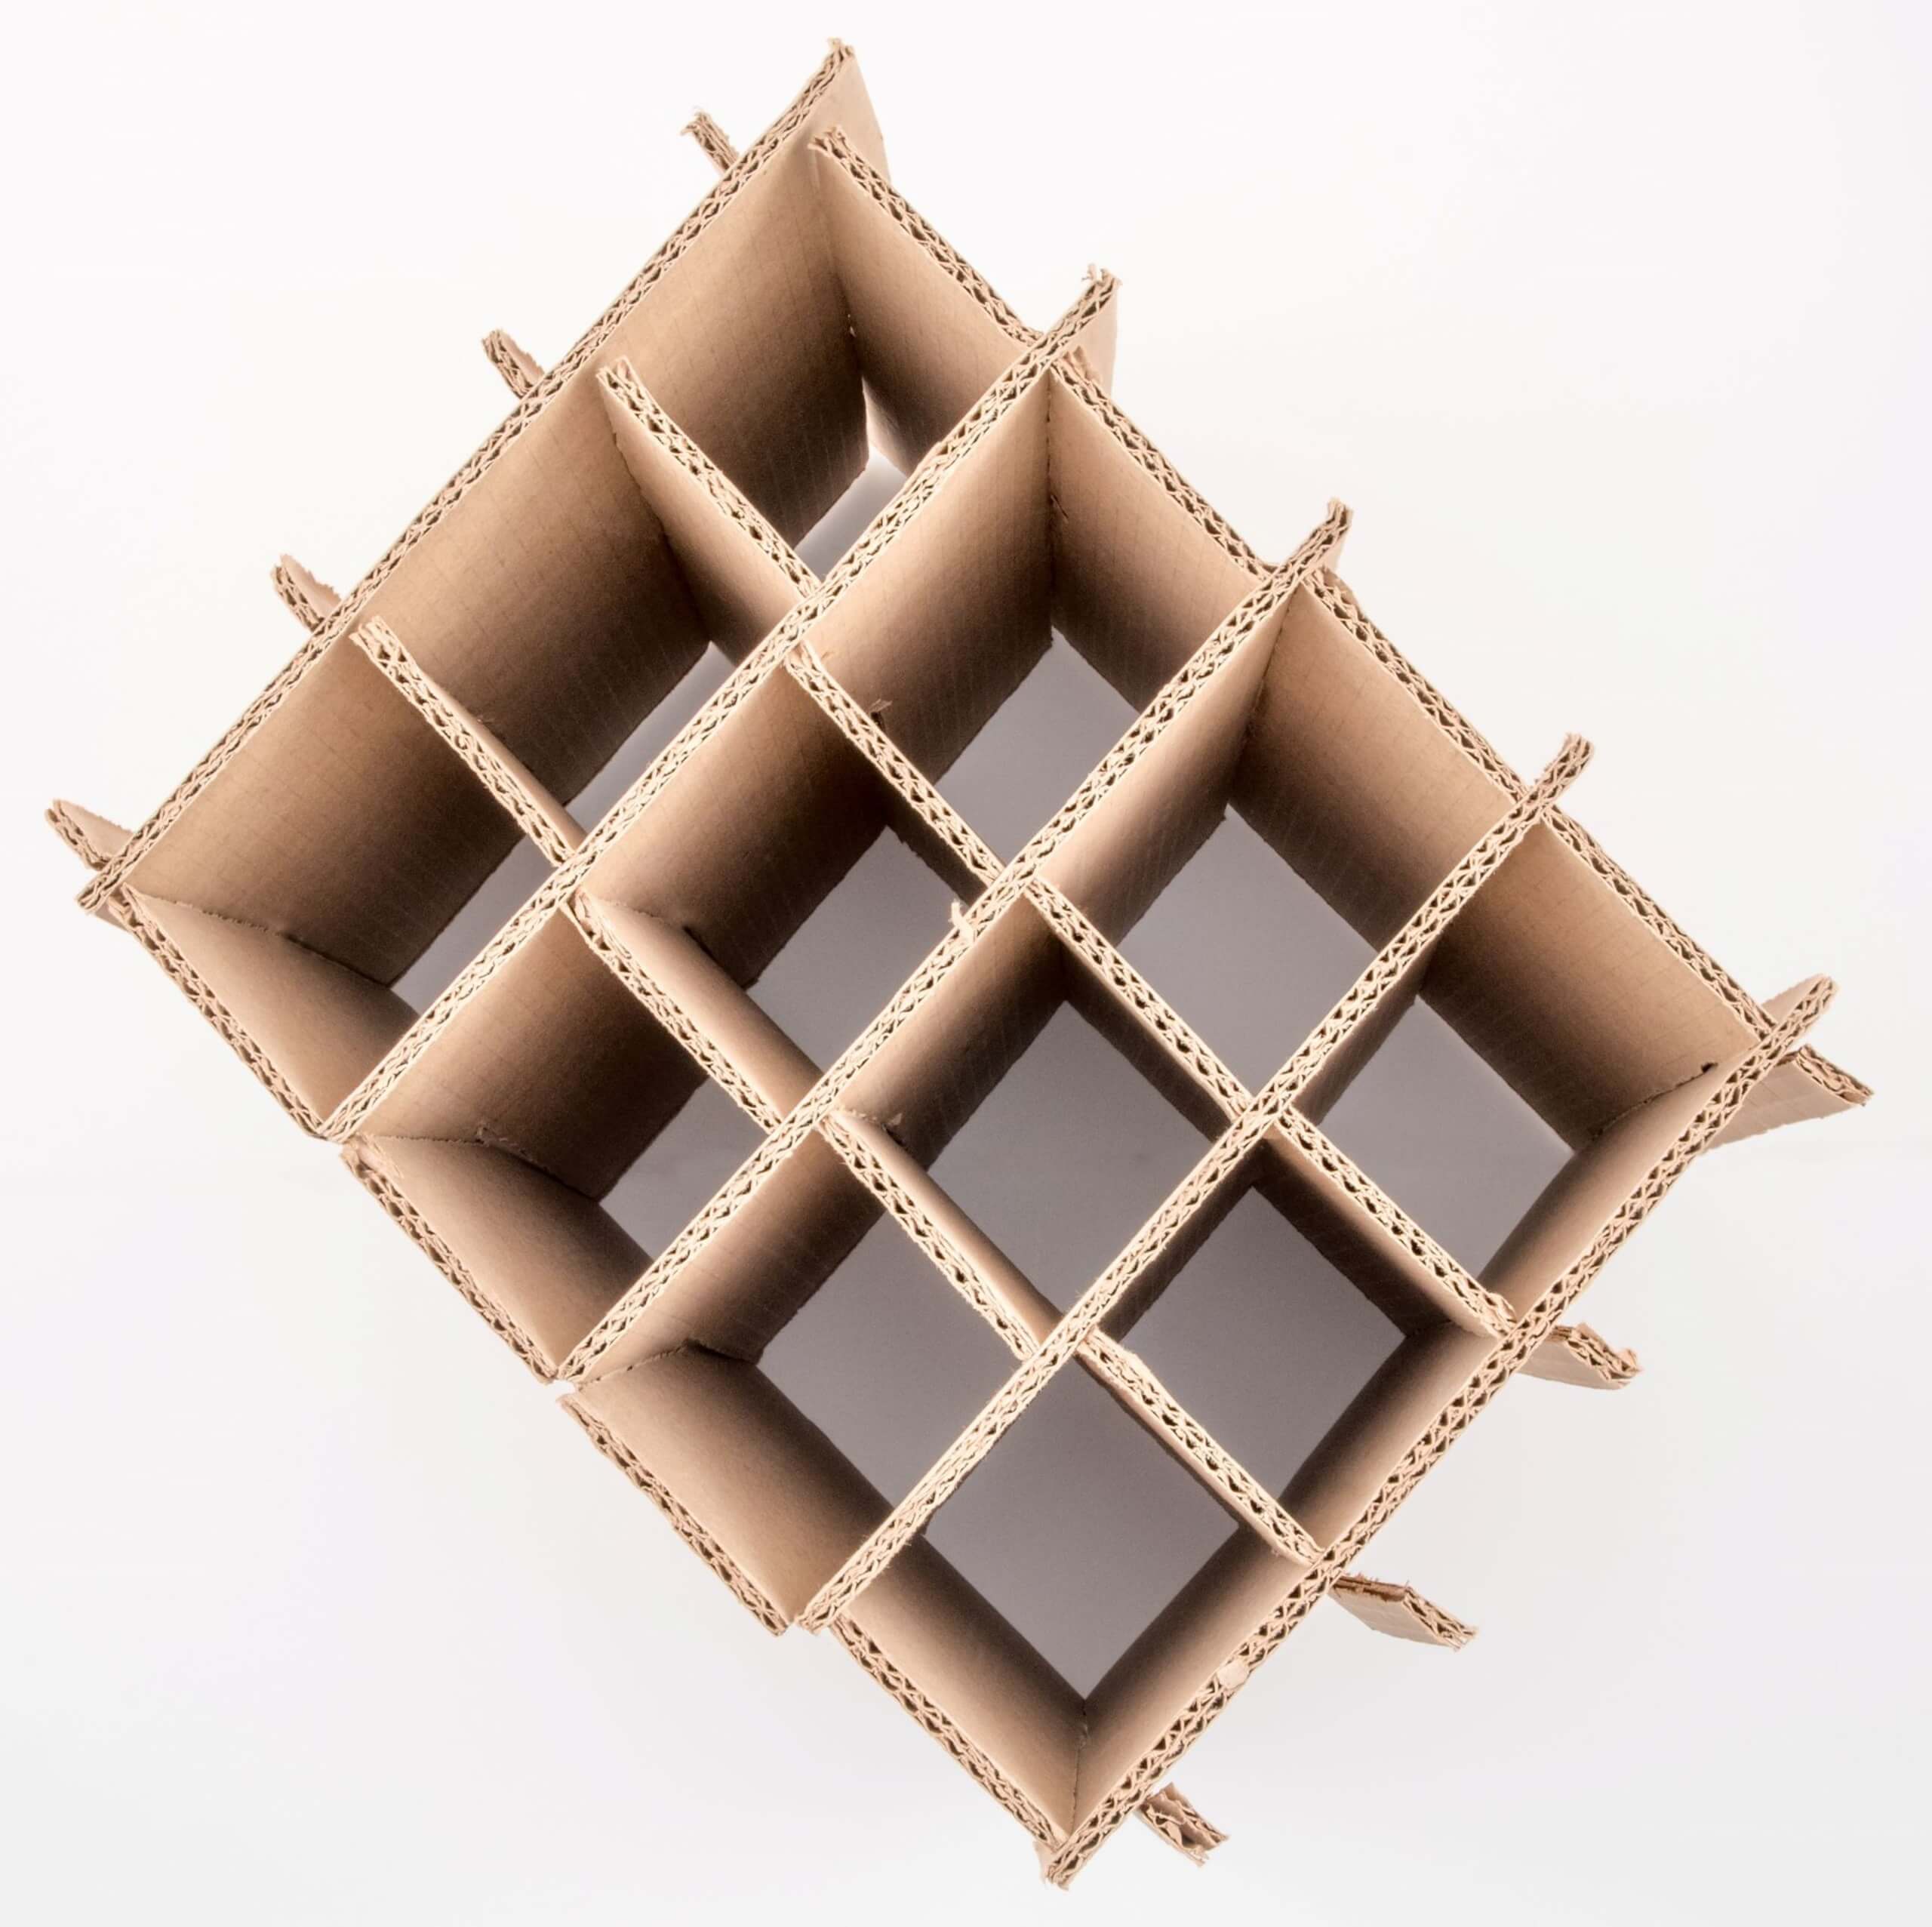 An image of Cardboard Box Divider Inserts.